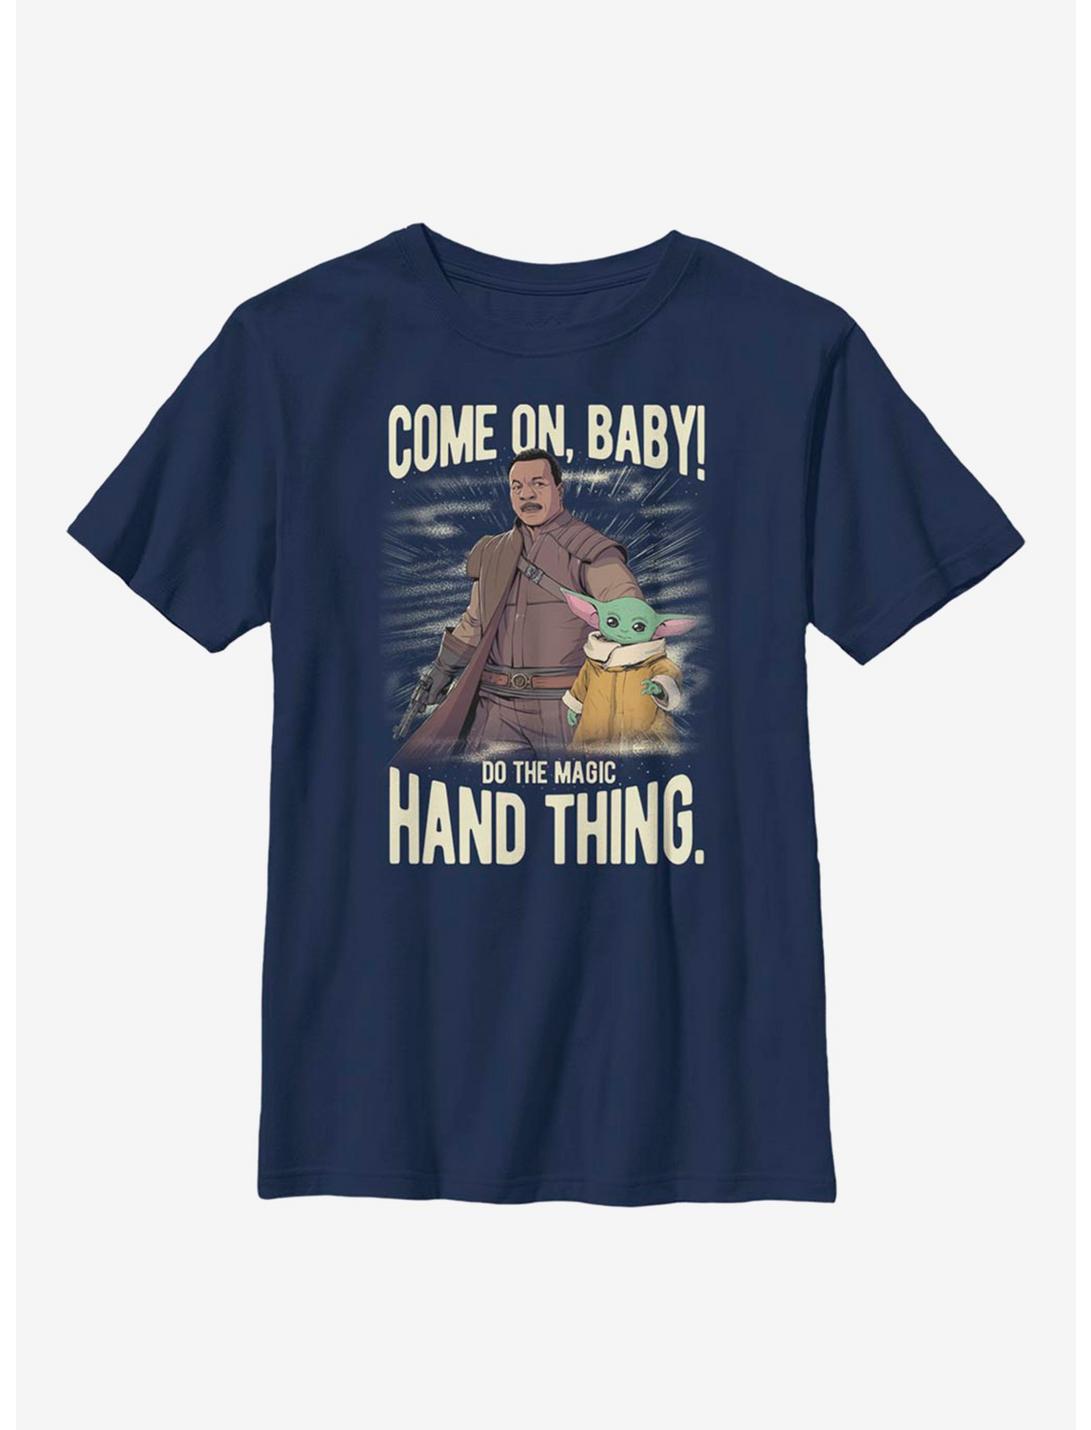 Star Wars The Mandalorian The Child Hand Thing Youth T-Shirt, NAVY, hi-res